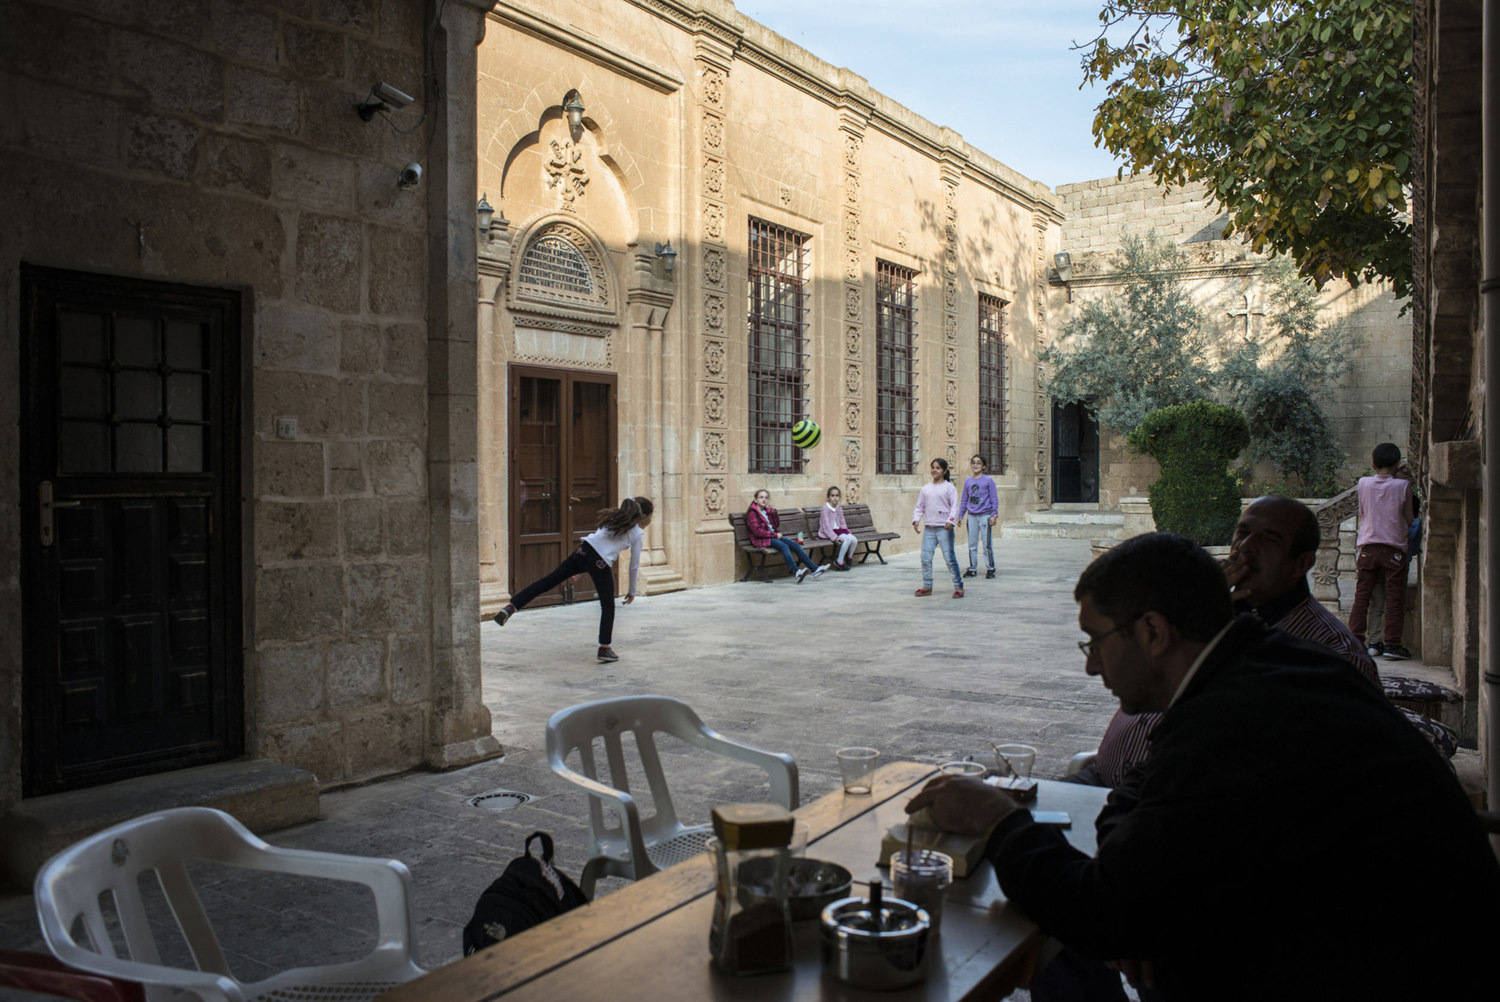  Decon Ayhan Gürkan,(l) reads from a religious book in the courtyard of Mor Barsaumo before teaching an Aramaic lesson on October 30th, 2014.

The Mor Barsaumo church is over 1,500 years old and was renovated in 1943. It is located 21 Şen Caddessi in